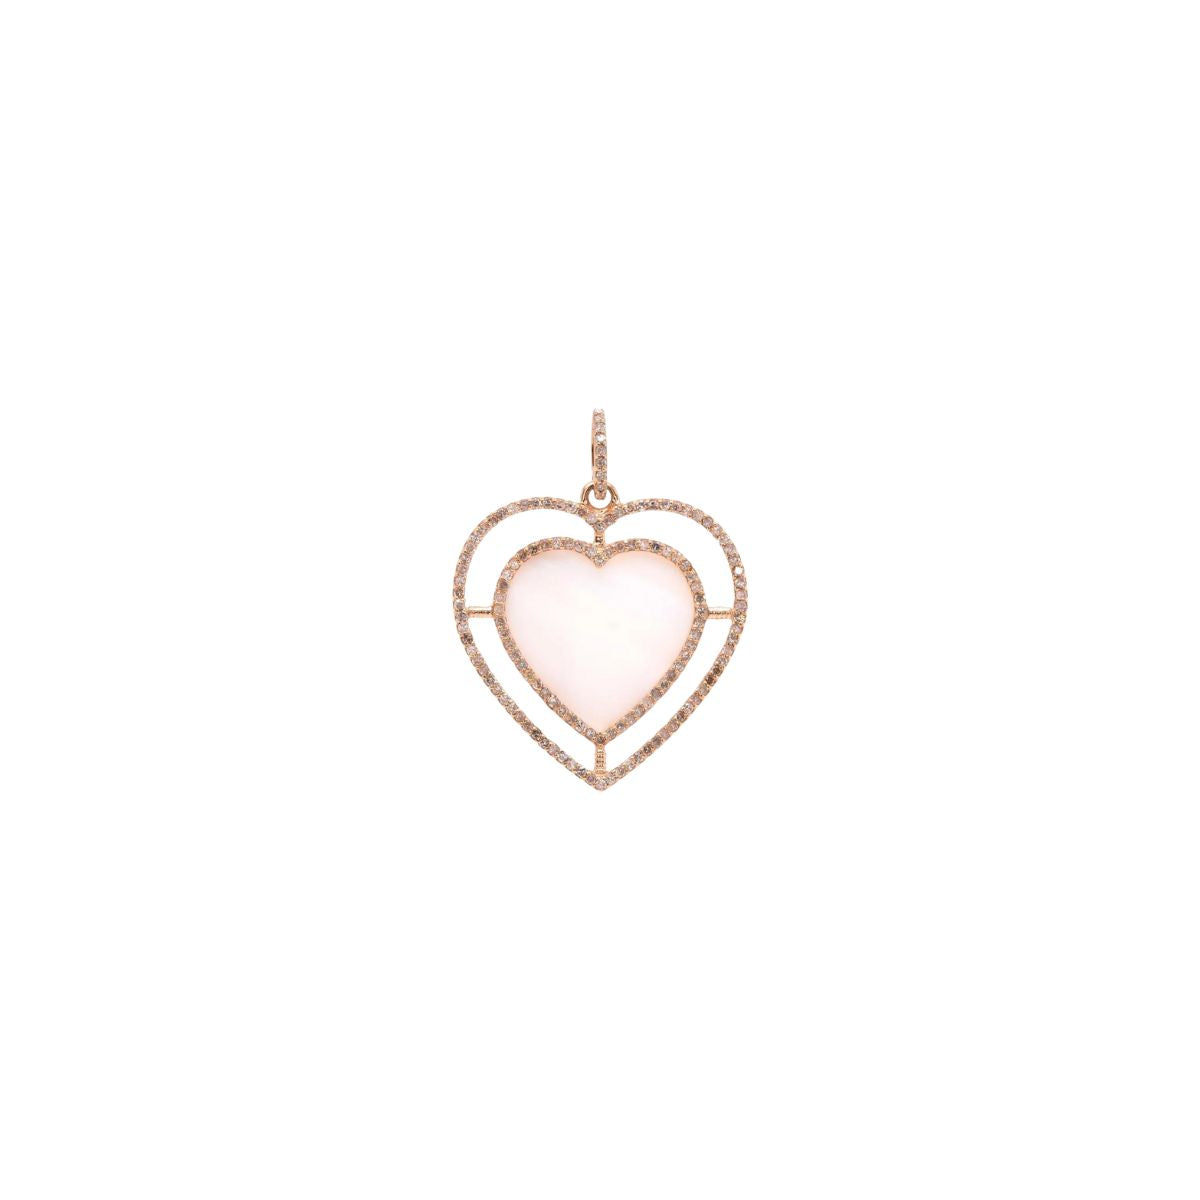 Bridget King Mother-of-Pearl Halo Heart Pendant in Yellow Gold